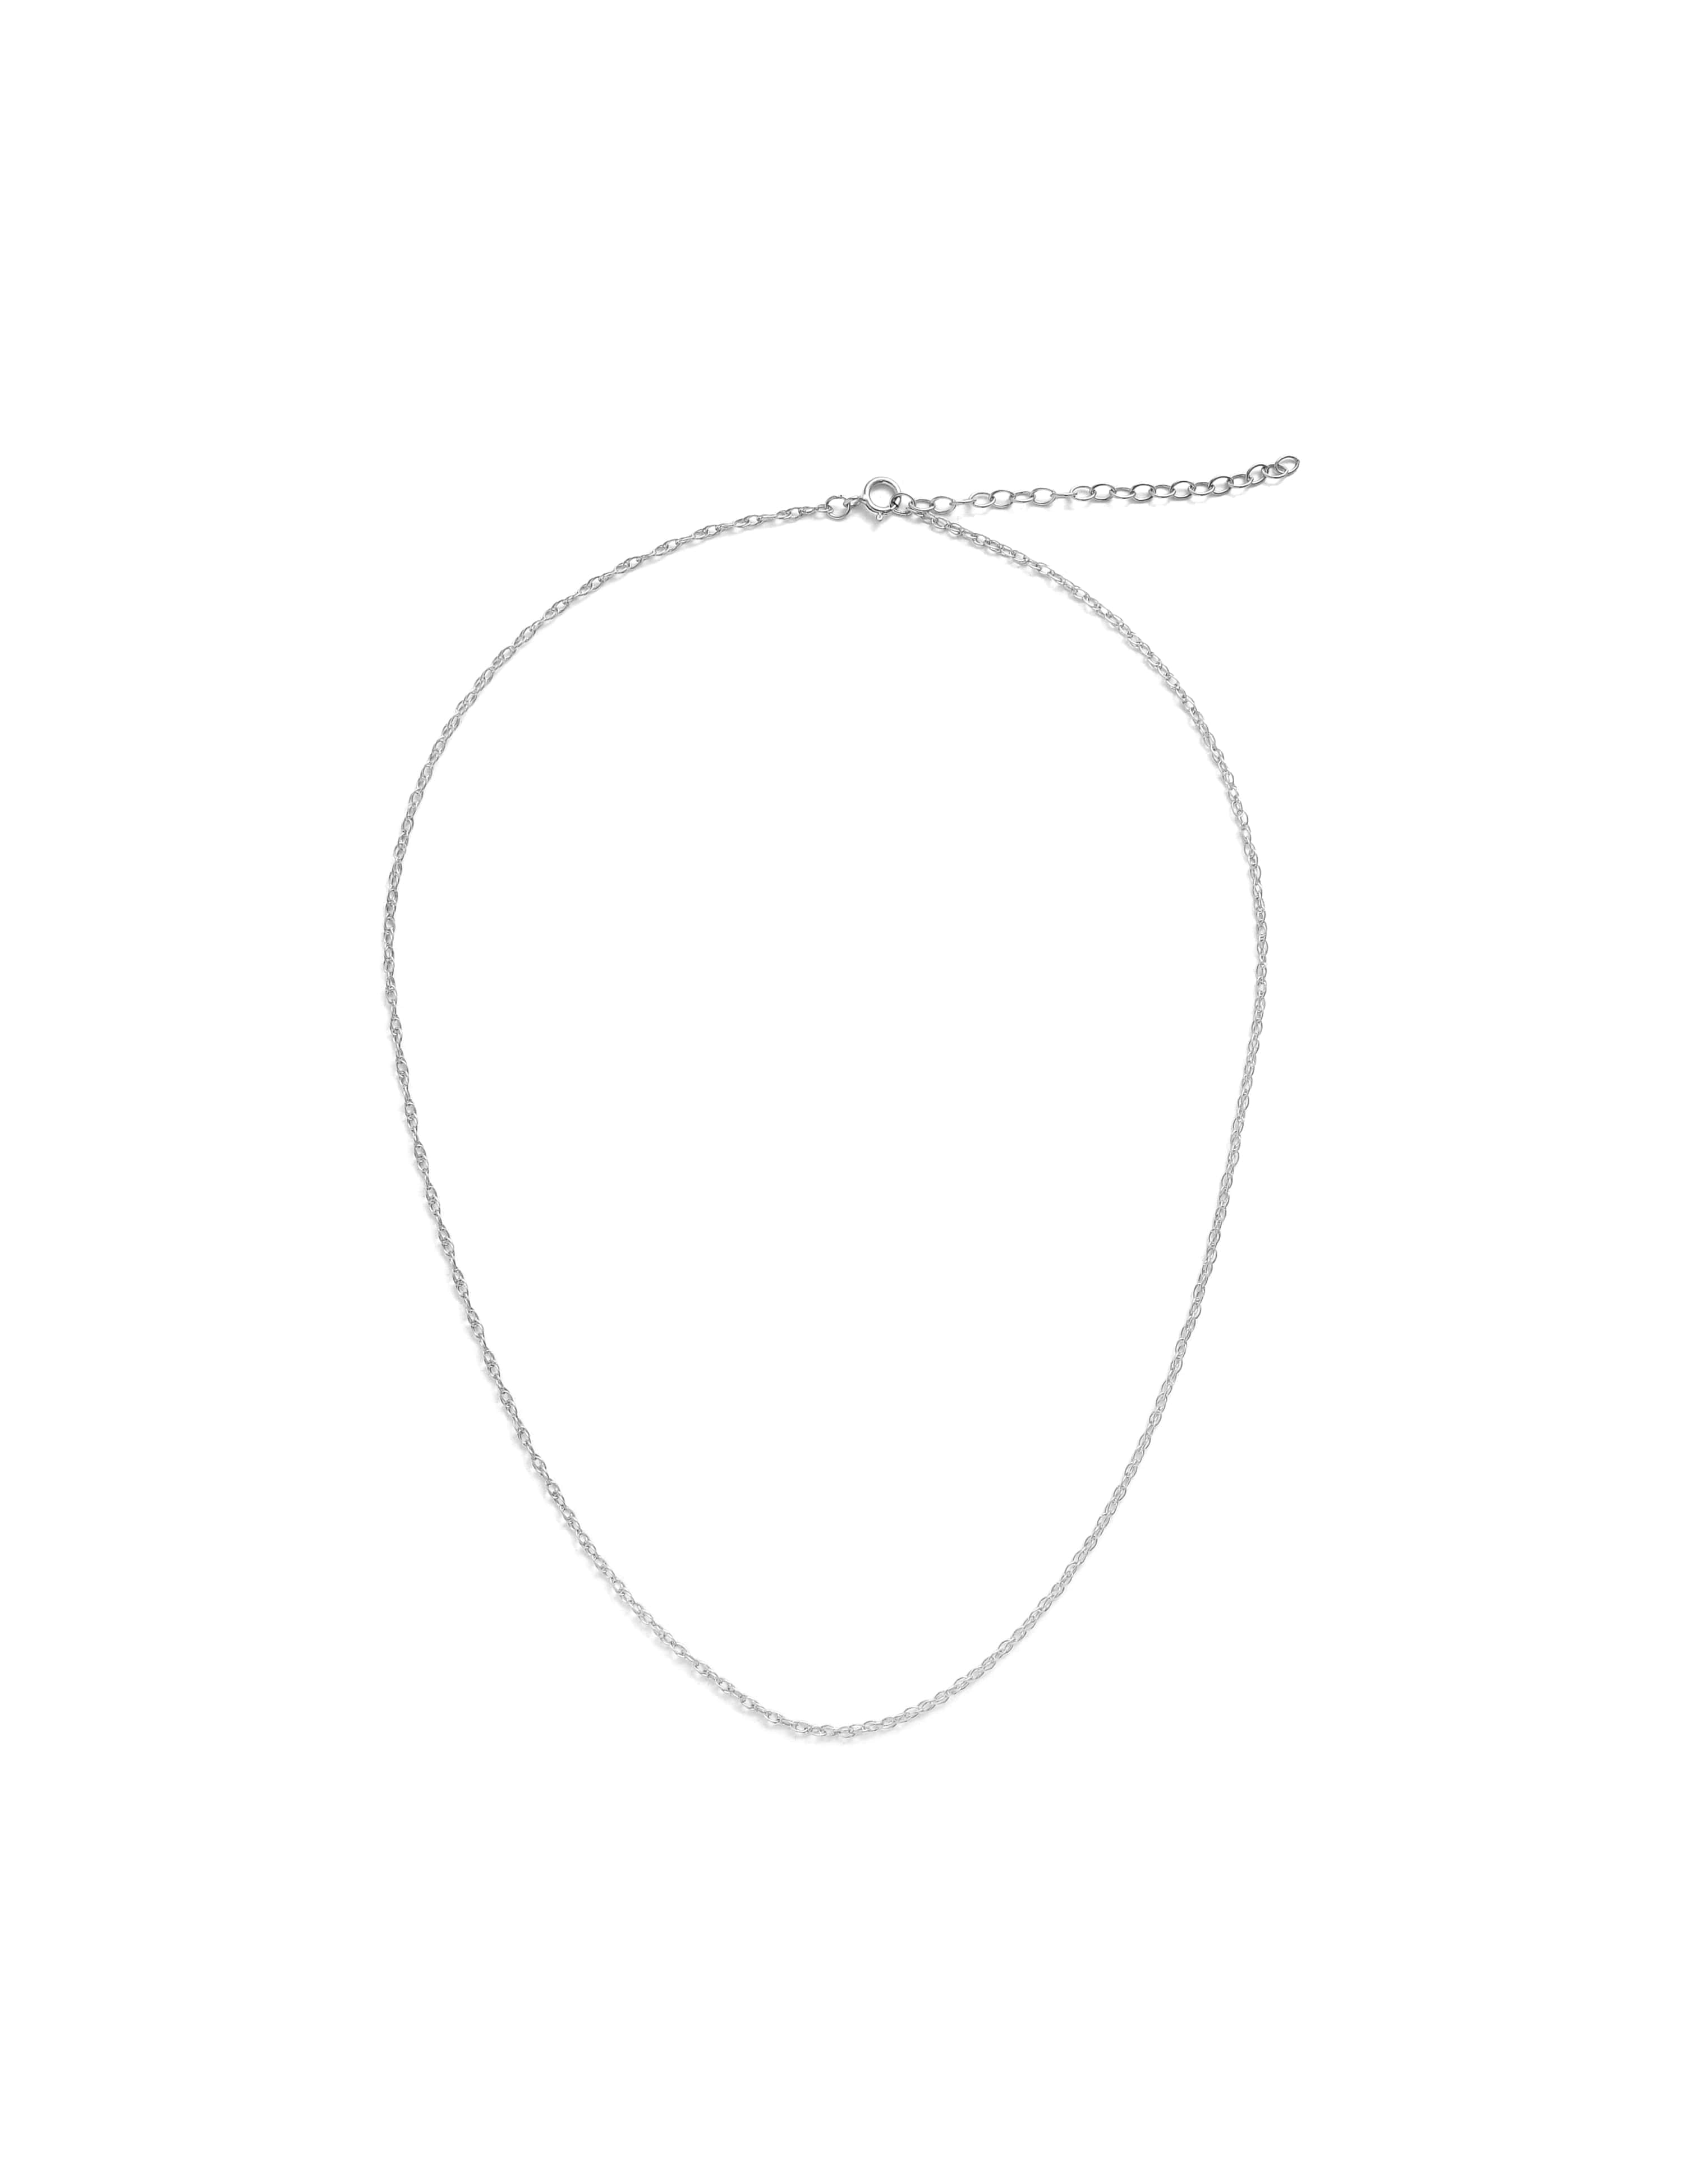 Sterling Silver Twisted Rope Chain with 2 inch Extender